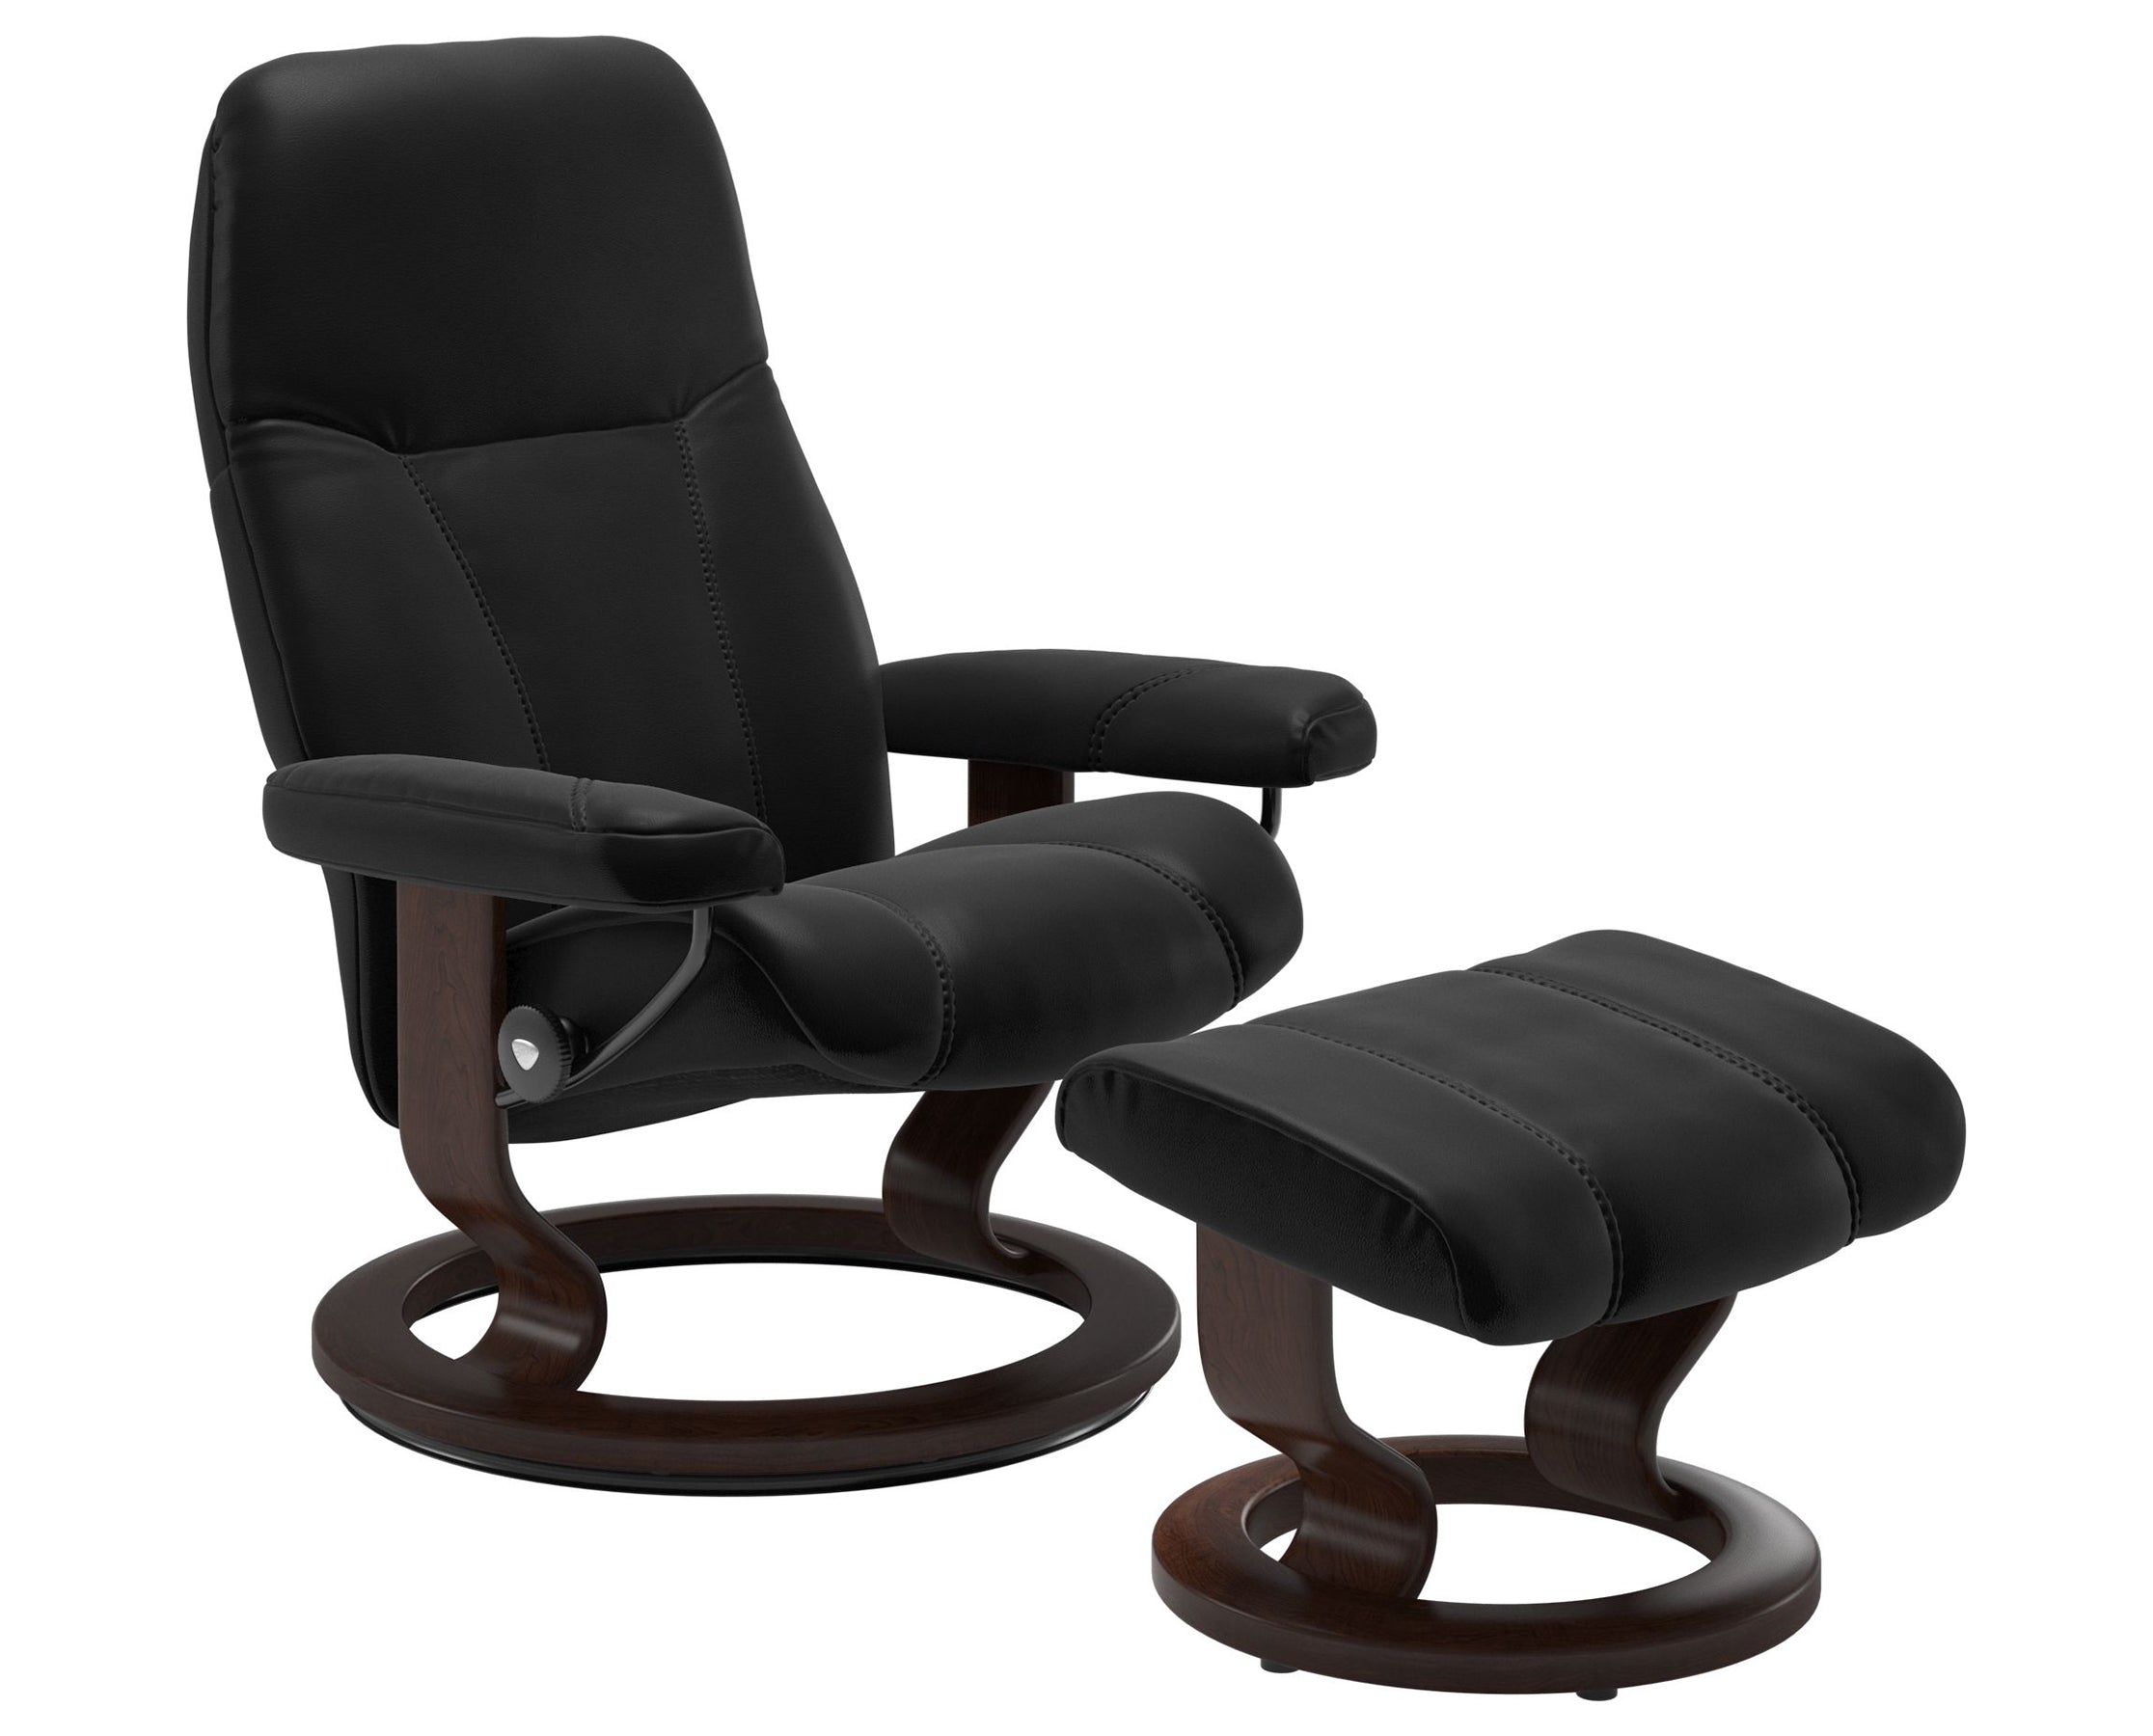 Batick Leather Black S/M/L and Brown Base | Stressless Consul Classic Recliner | Valley Ridge Furniture